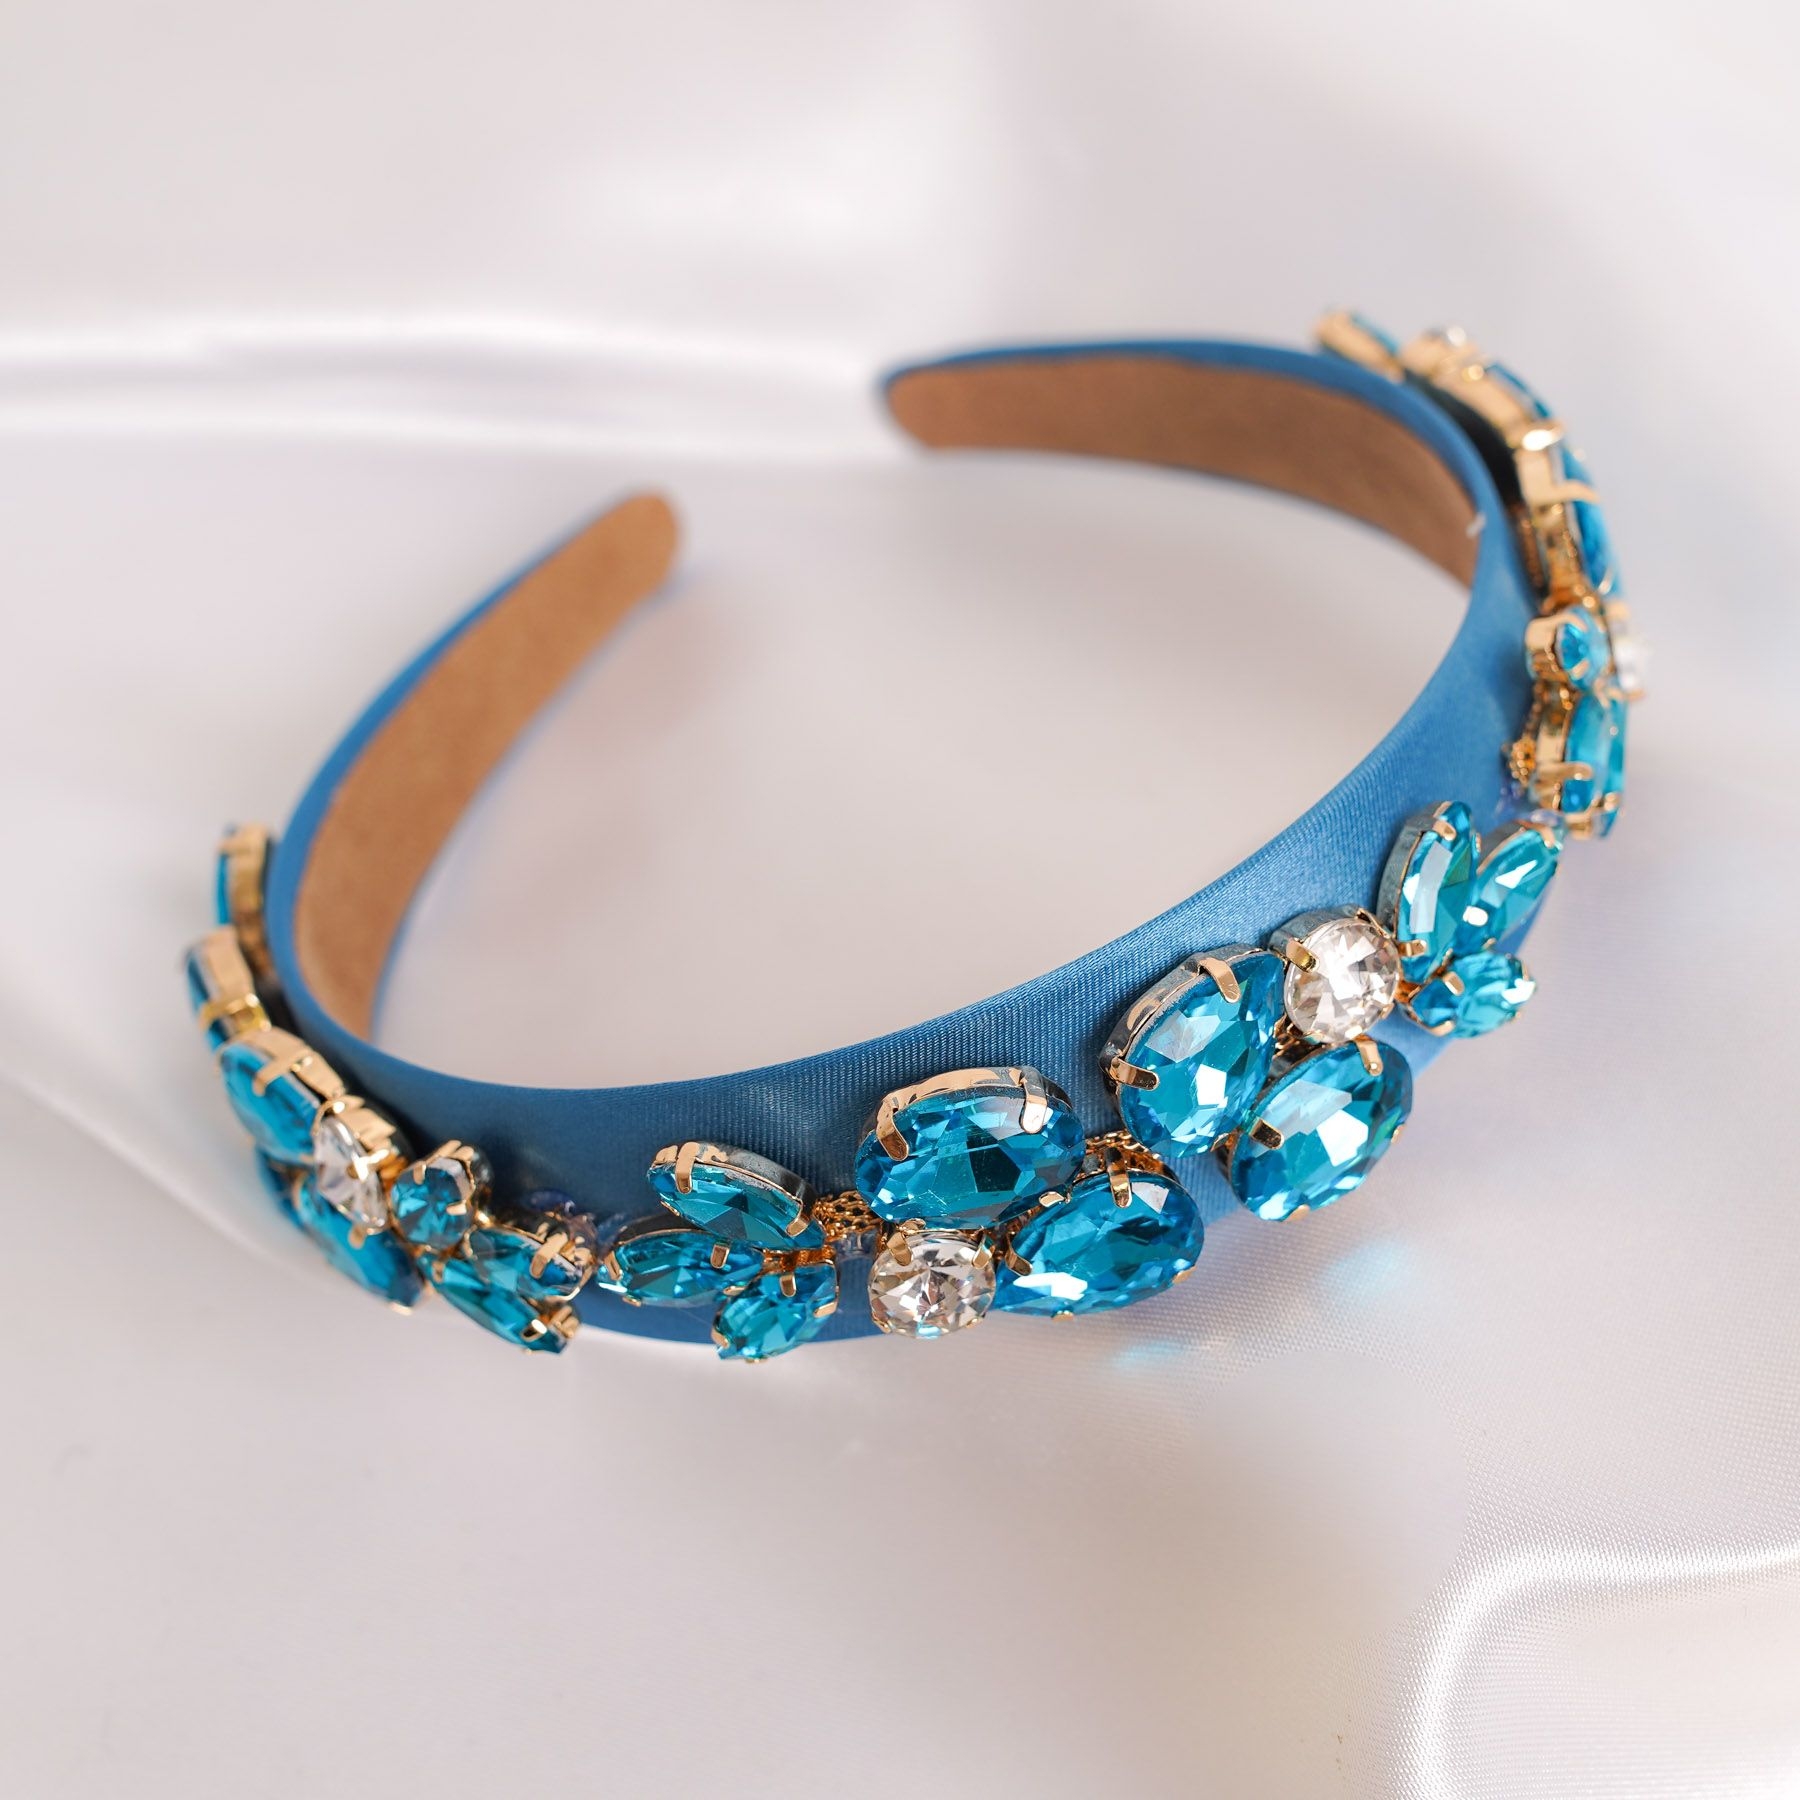 GISELLE HEADBAND - BLUE  ' - ' ΣΤΕΚΕΣ ΜΑΛΛΙΩΝ 